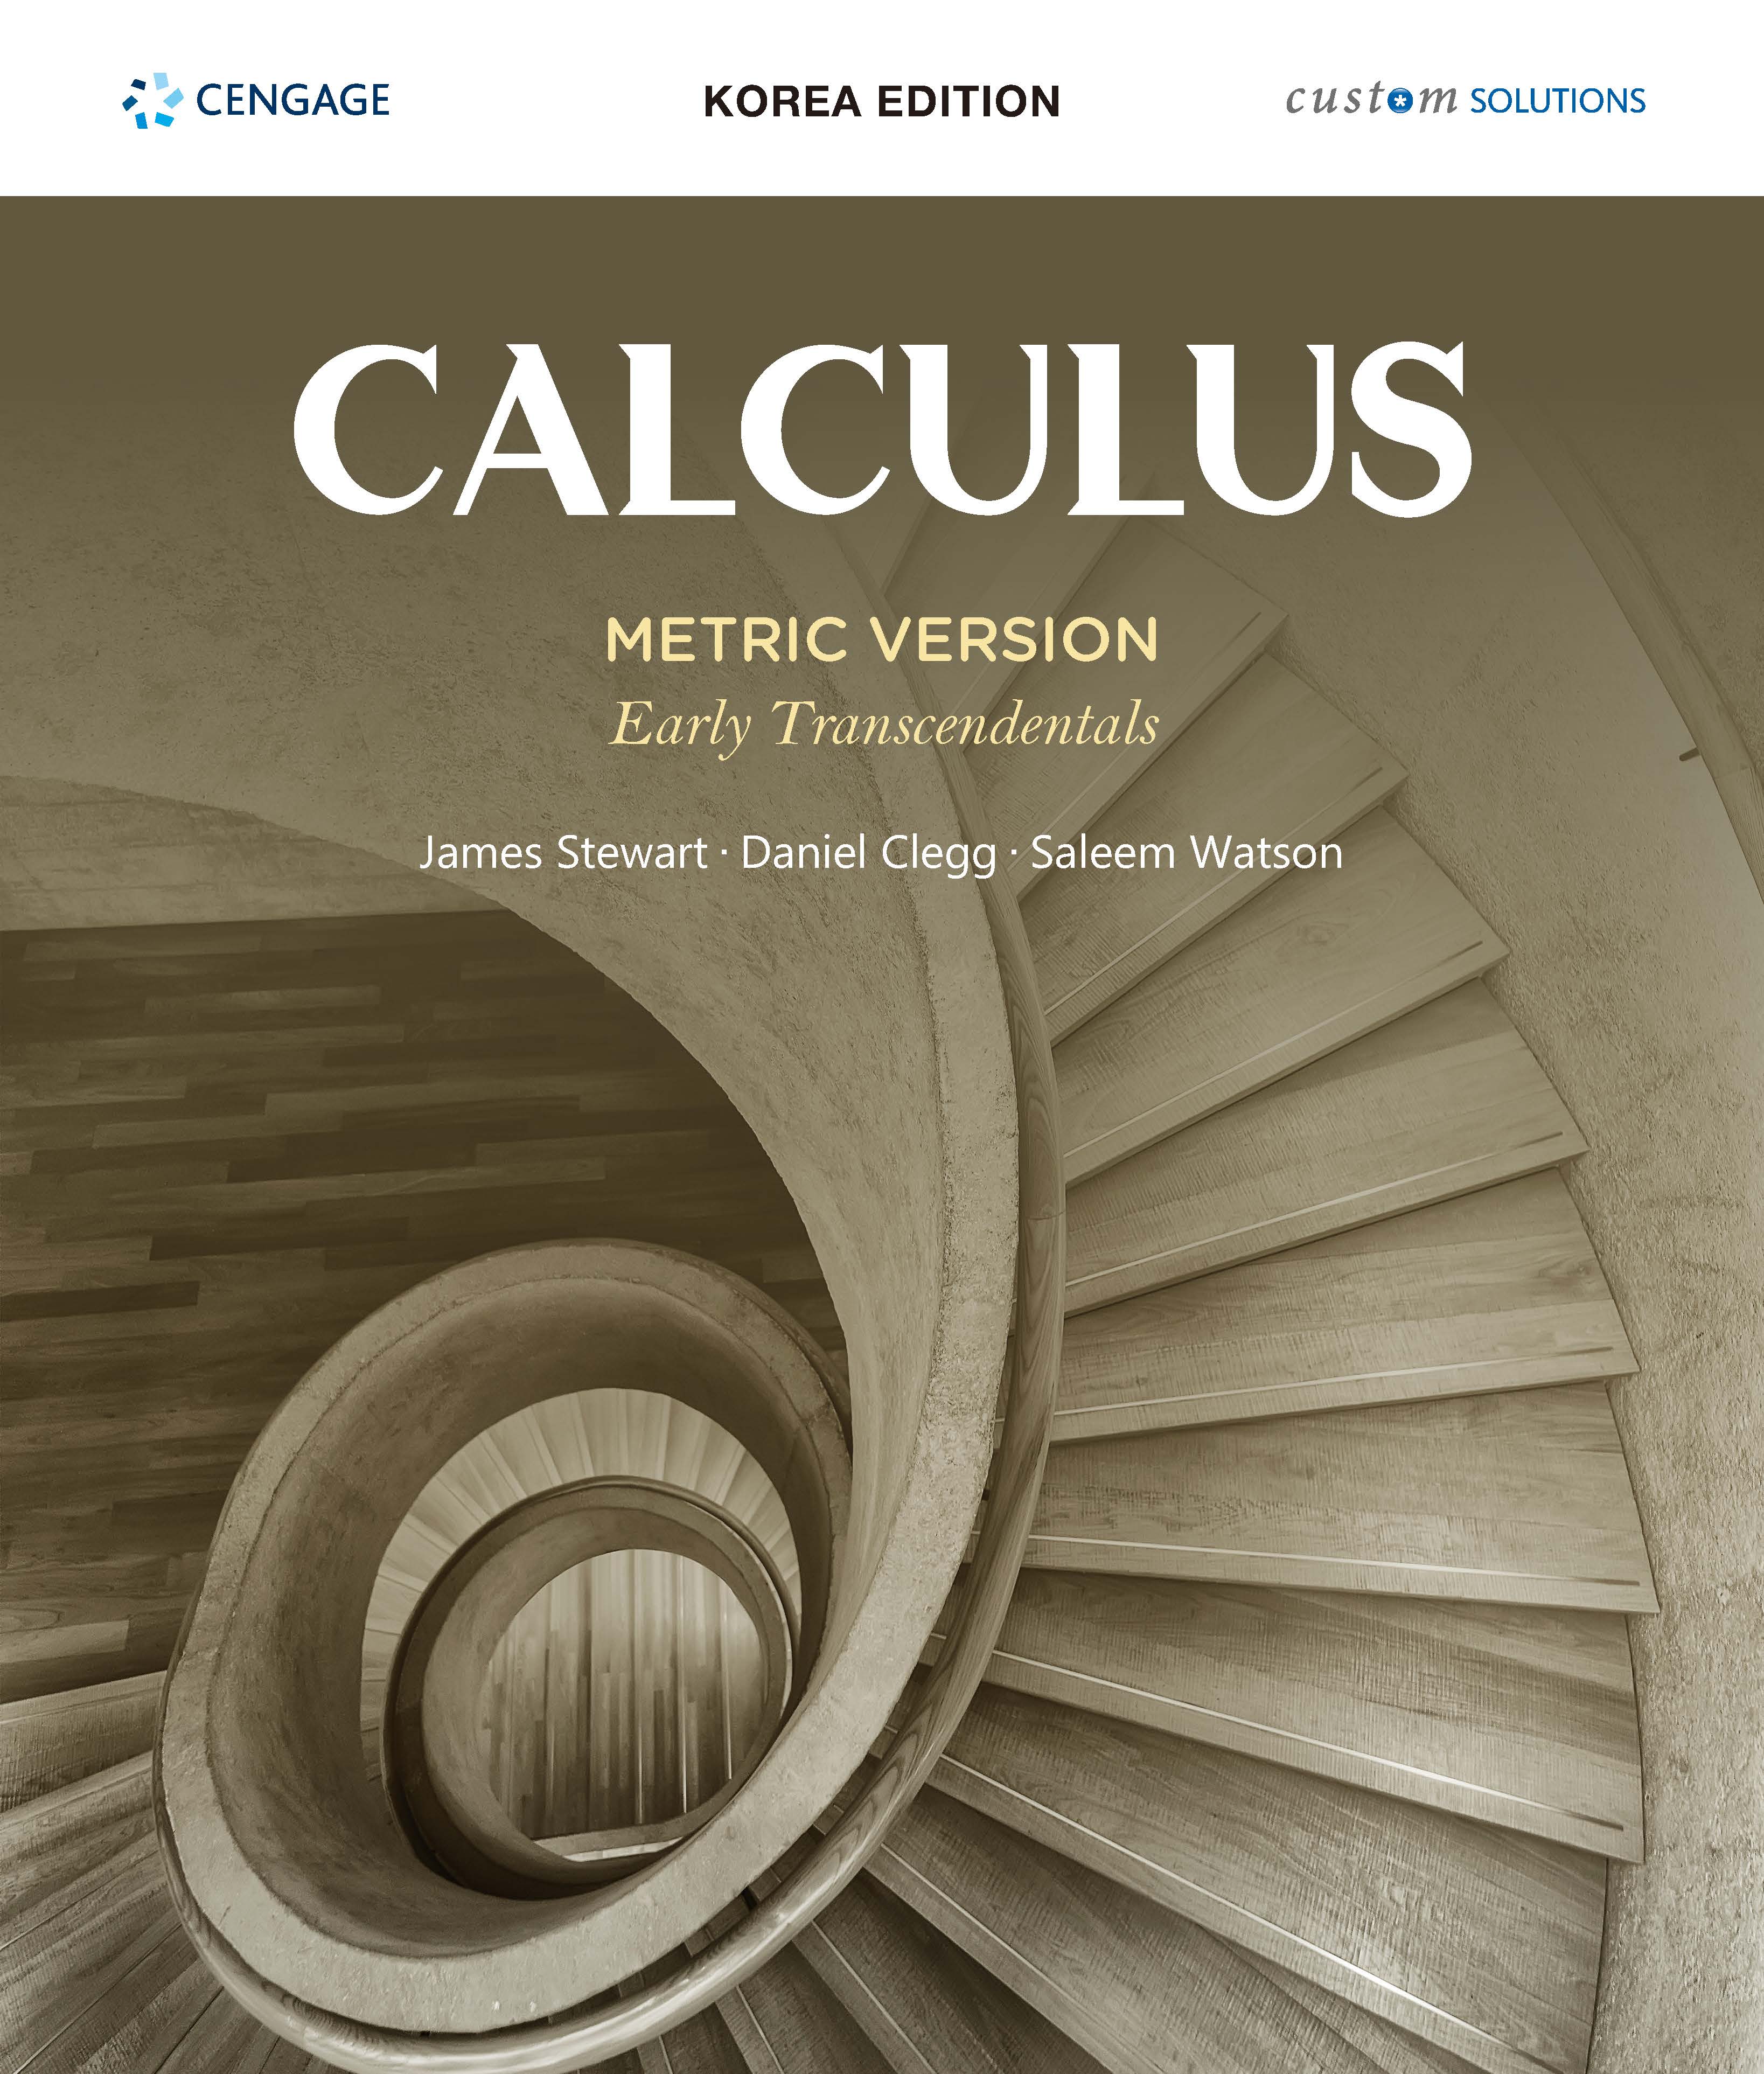 Calculus: Early Transcendentals, Metric Version, Korea Edition (원서: Calculus: Early Transcendentals, 9th)